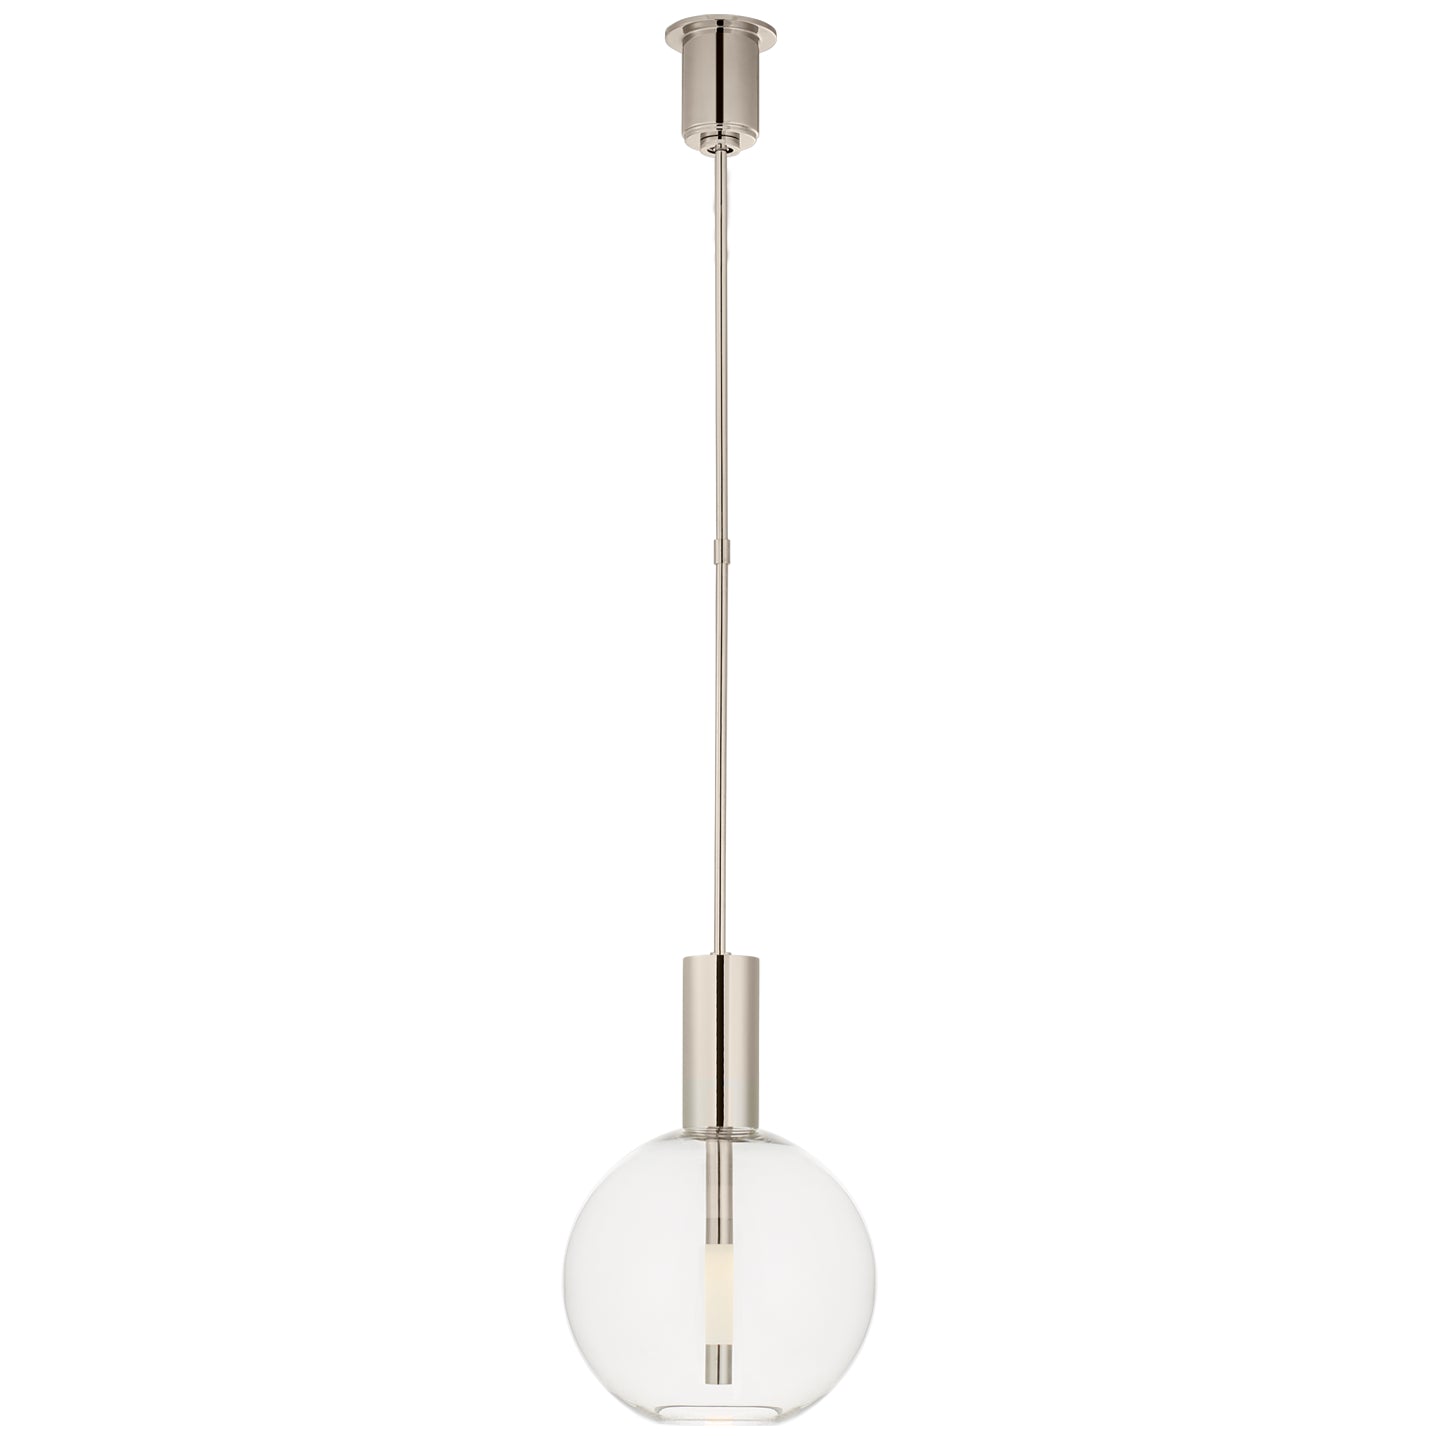 Load image into Gallery viewer, Visual Comfort Signature - KW 5131PN - LED Pendant - Nye - Polished Nickel
